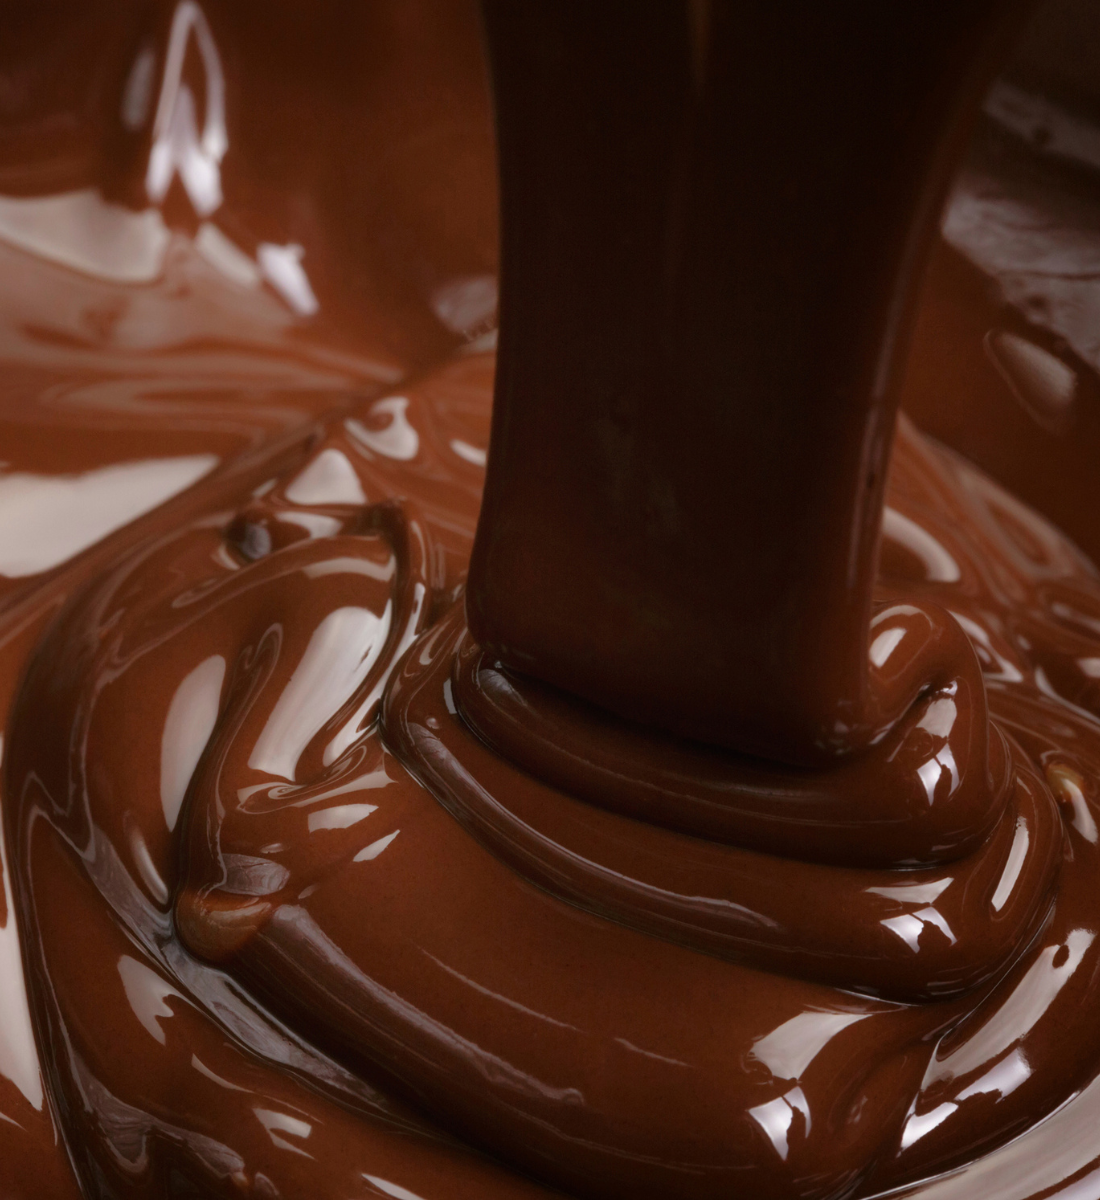 melted chocolate rippling